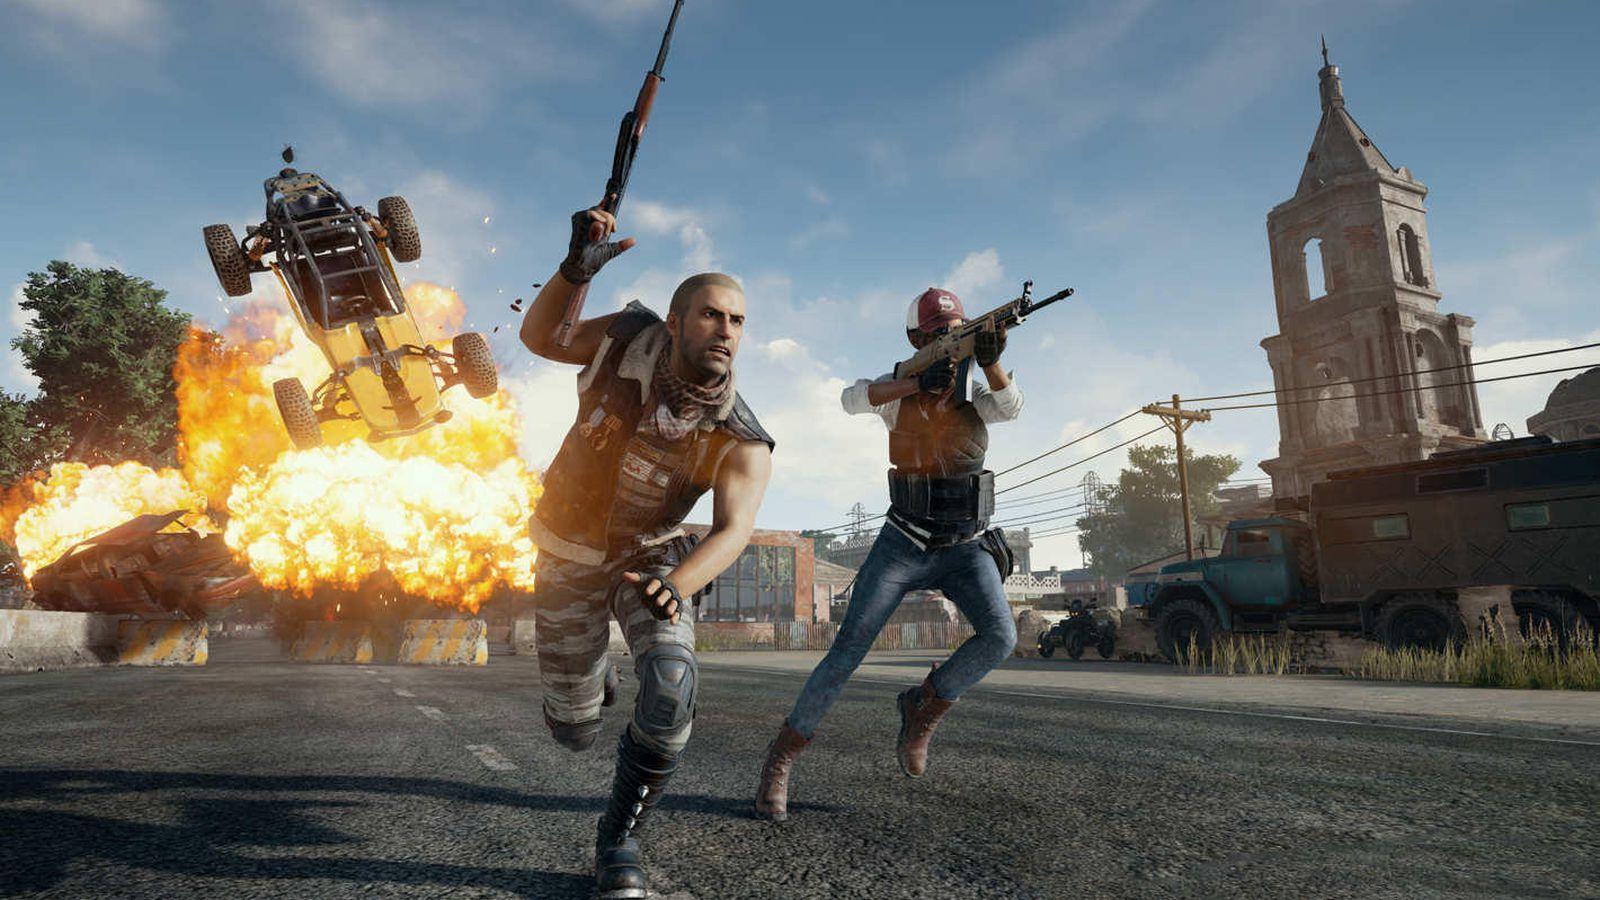 PlayerUnknown's Battlegrounds hits Xbox One on Dec. 12